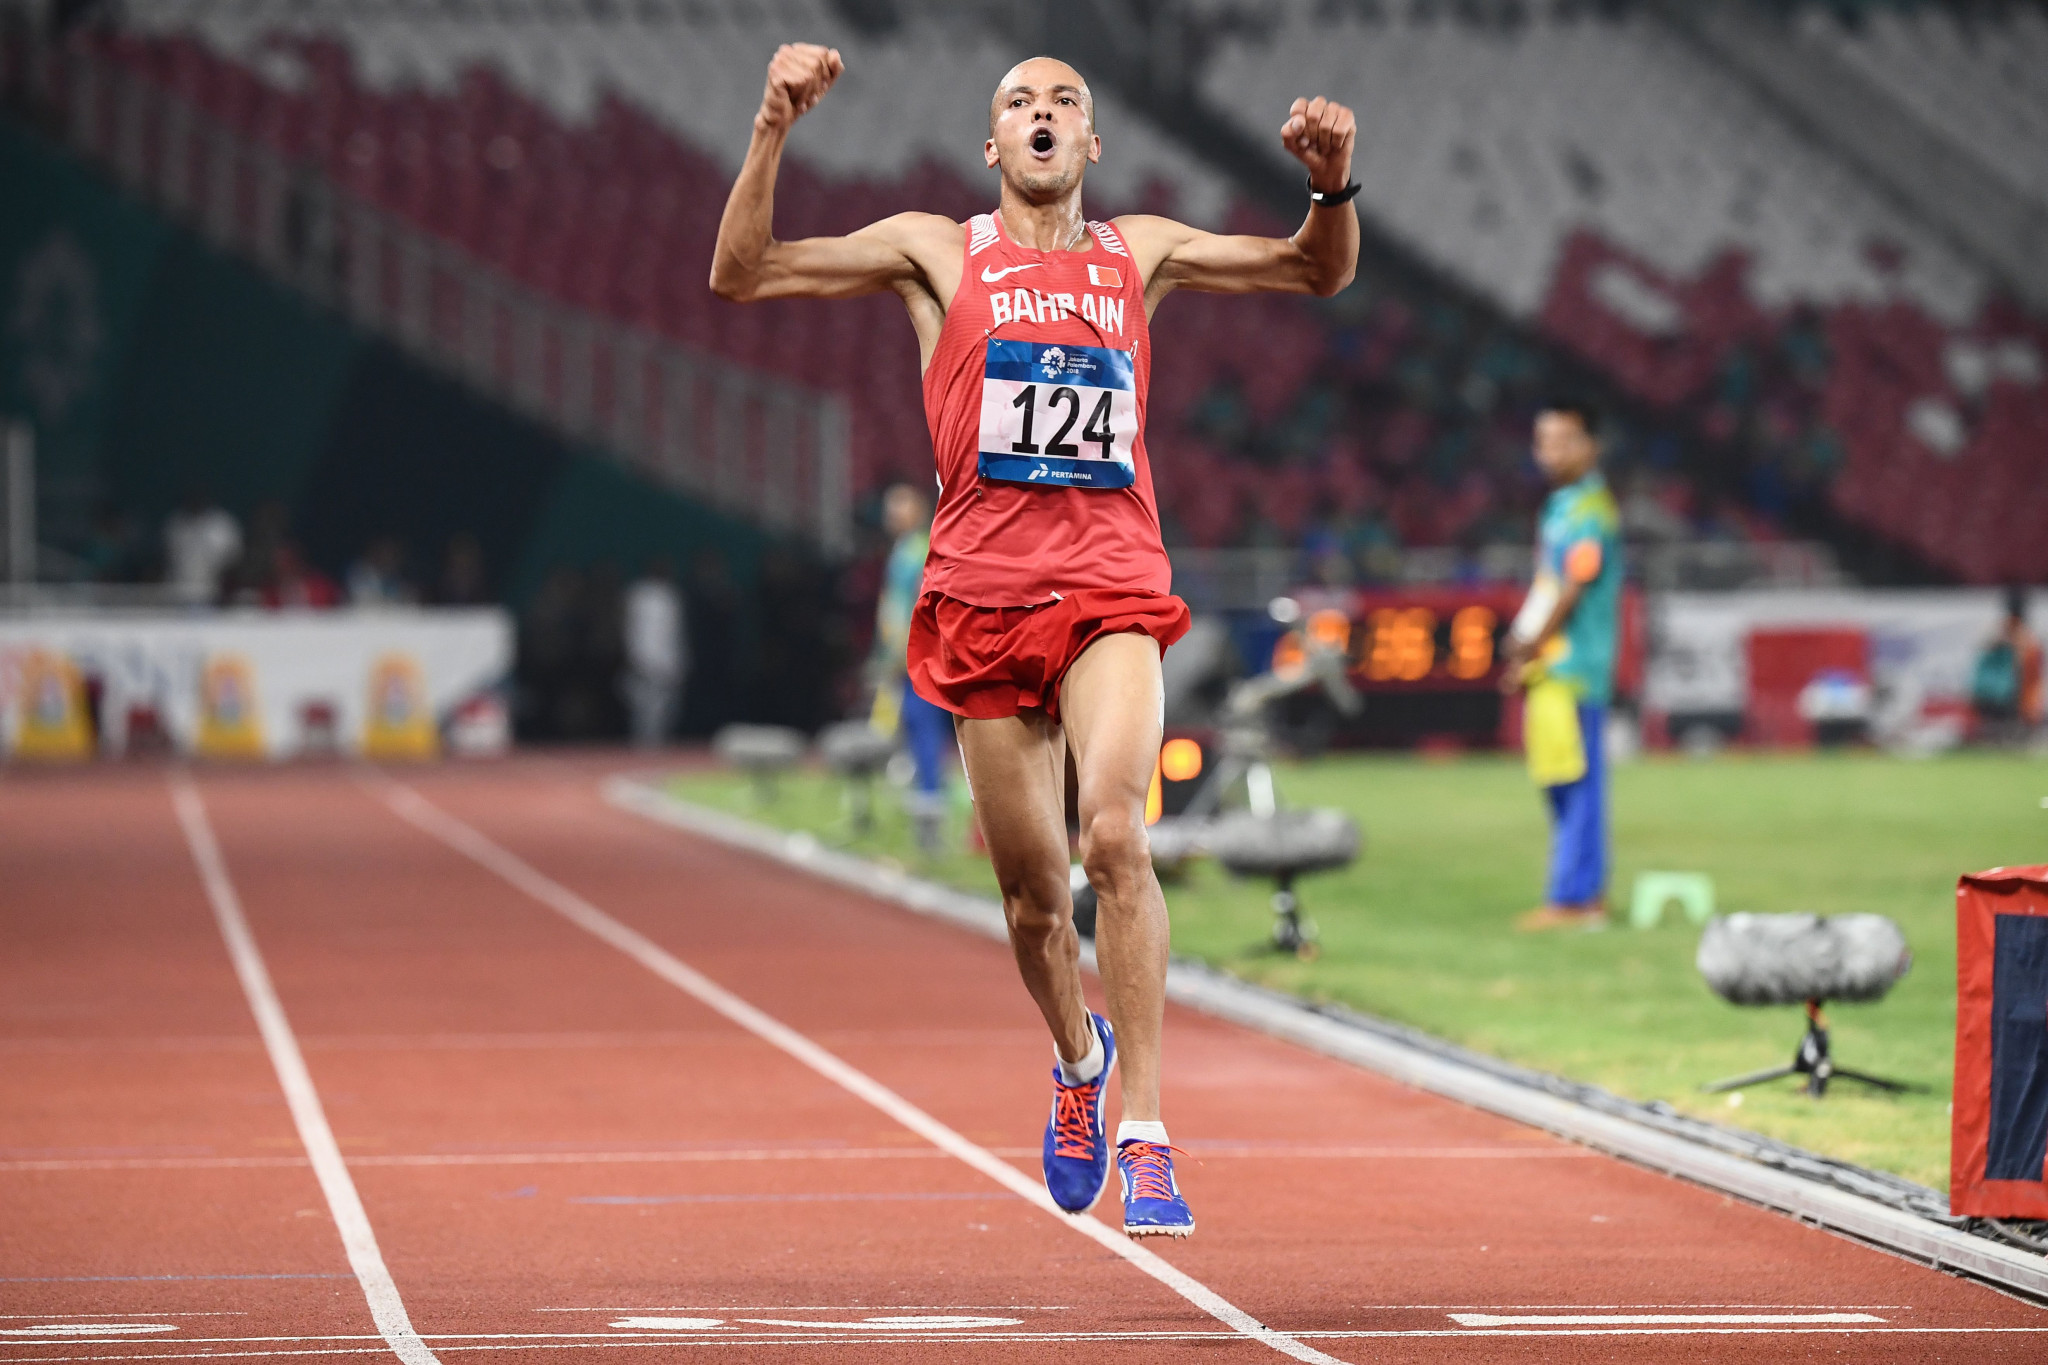 Bahrain's Hassan Chani won the 10,000m at Jakarta 2018 by nearly 25 seconds but will now lose his medal after being banned by the Athletics Integrity Unit ©Getty Images